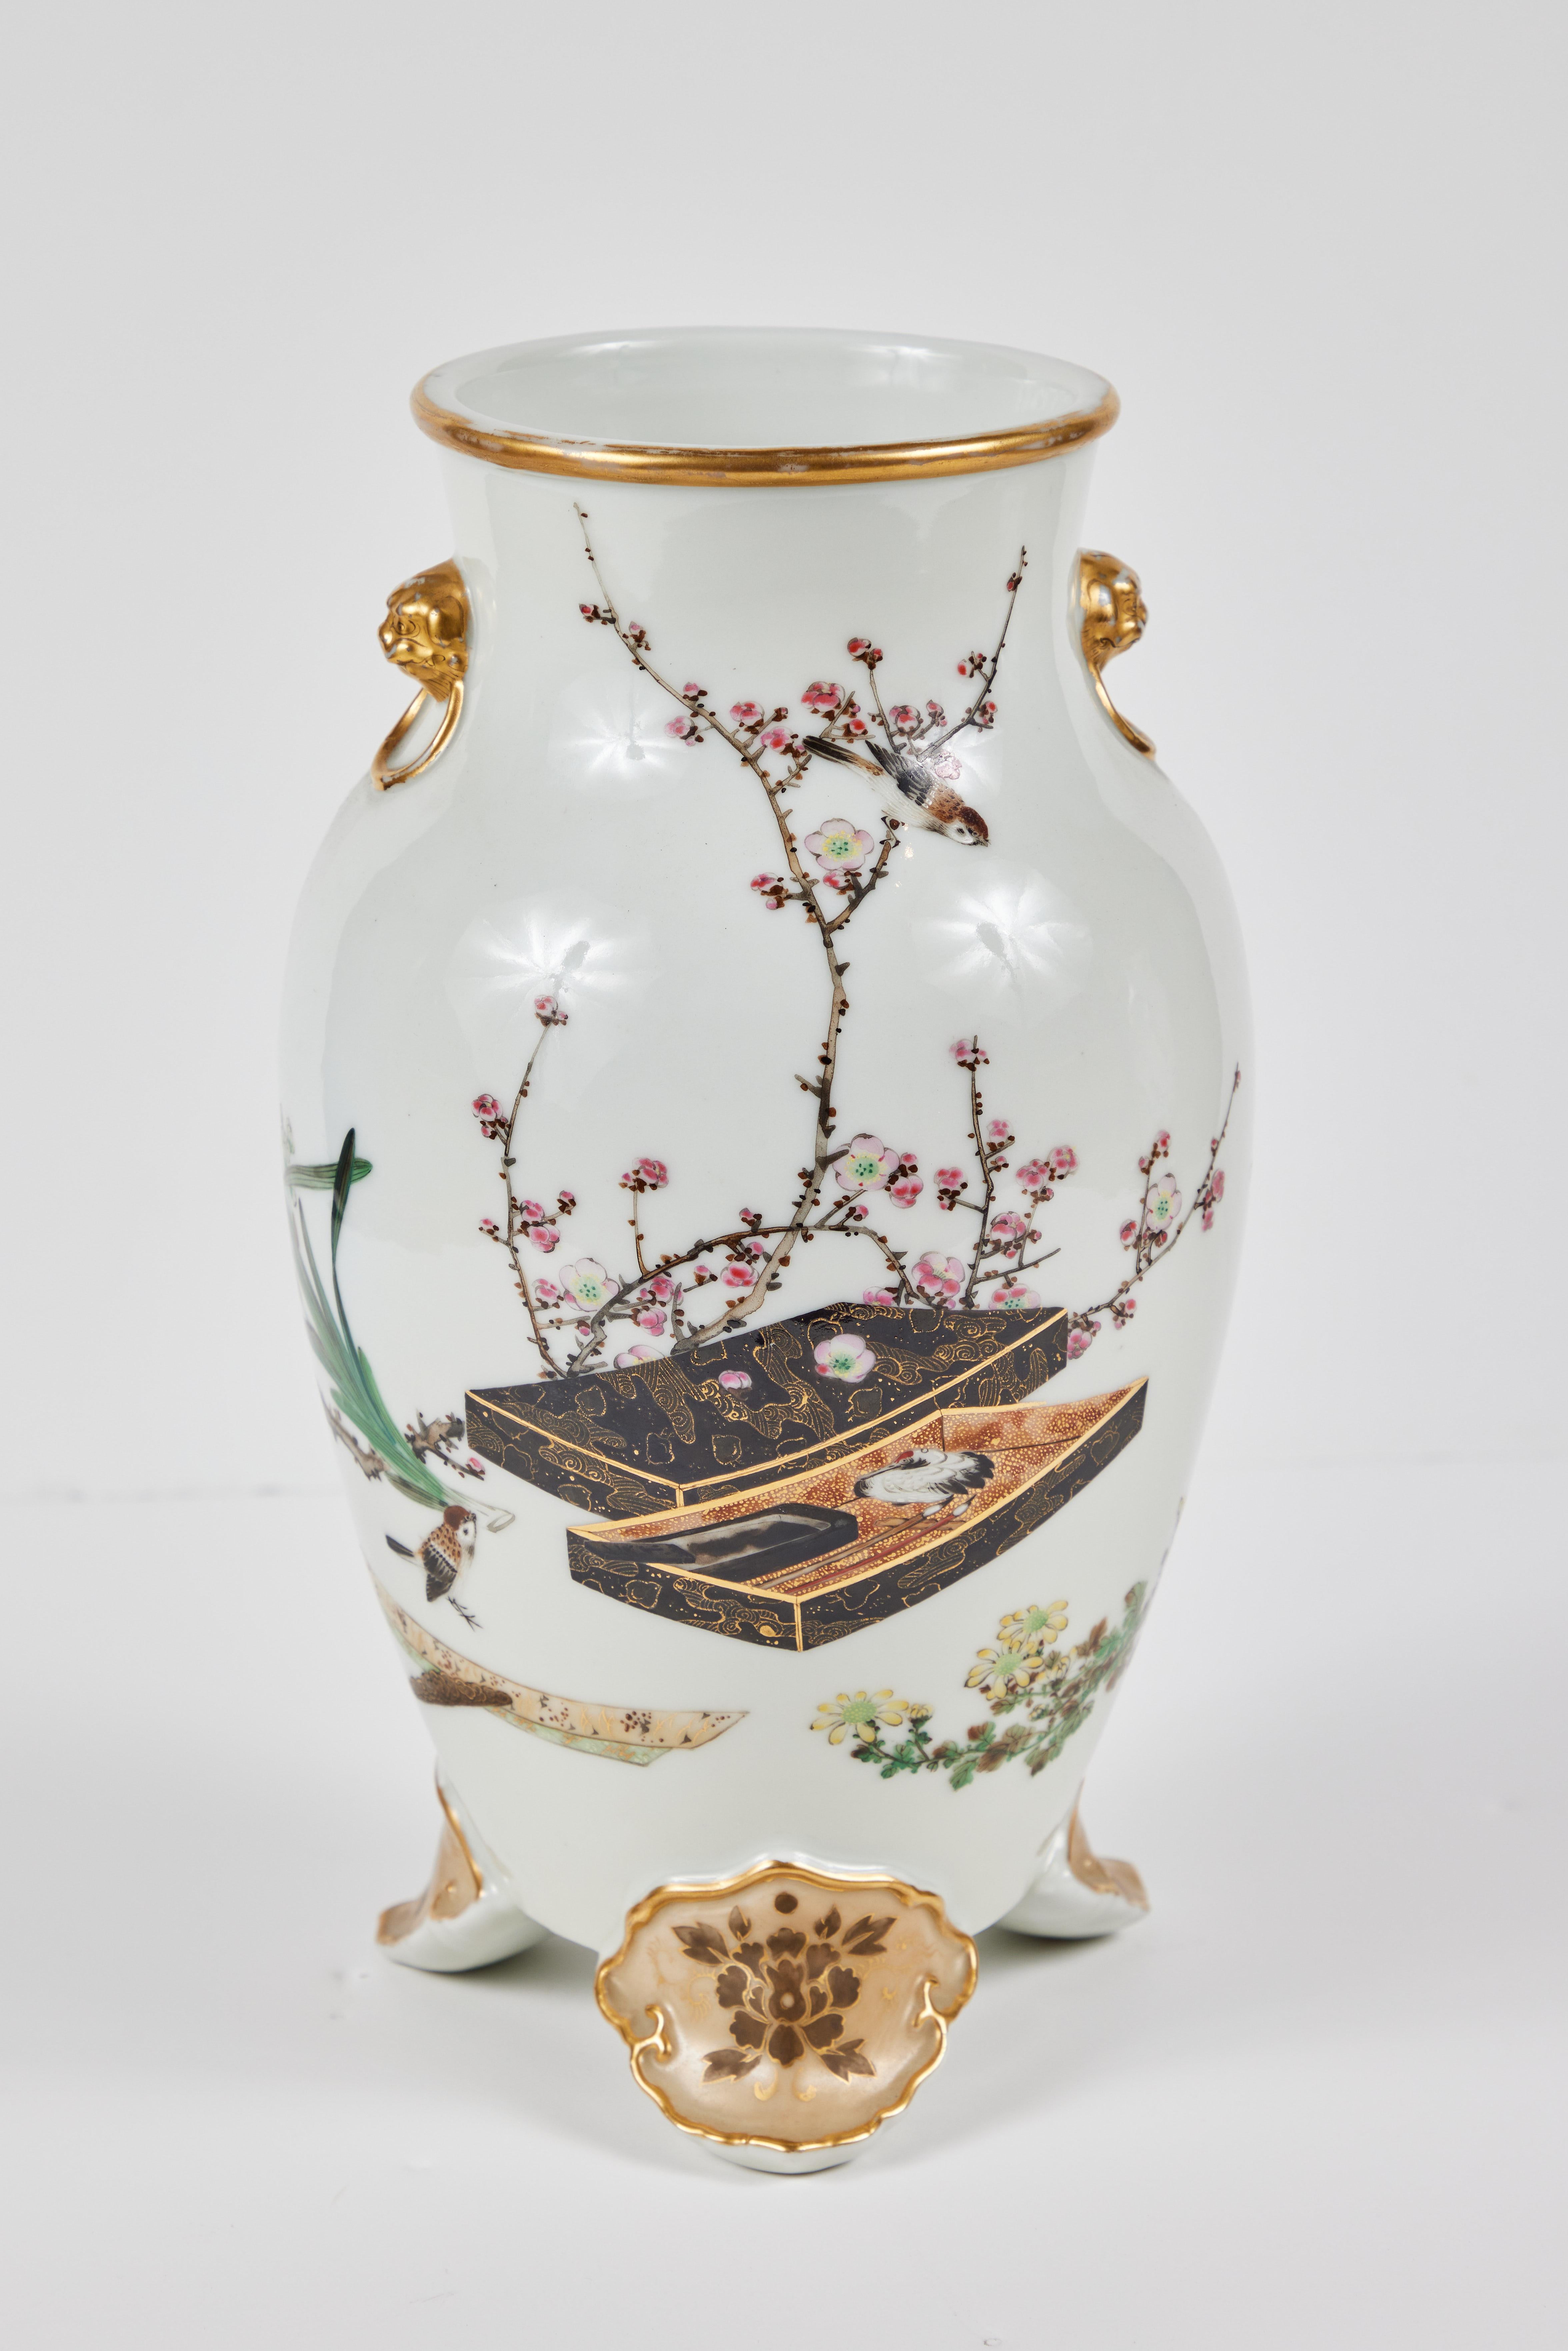 An elegant pair of hand-painted, parcel gilt, turn-of-the-century, Japanese vases on petal form feet. Each featuring images of calligraphy sets amidst flowering branches and birds.  Signed on the bottom.